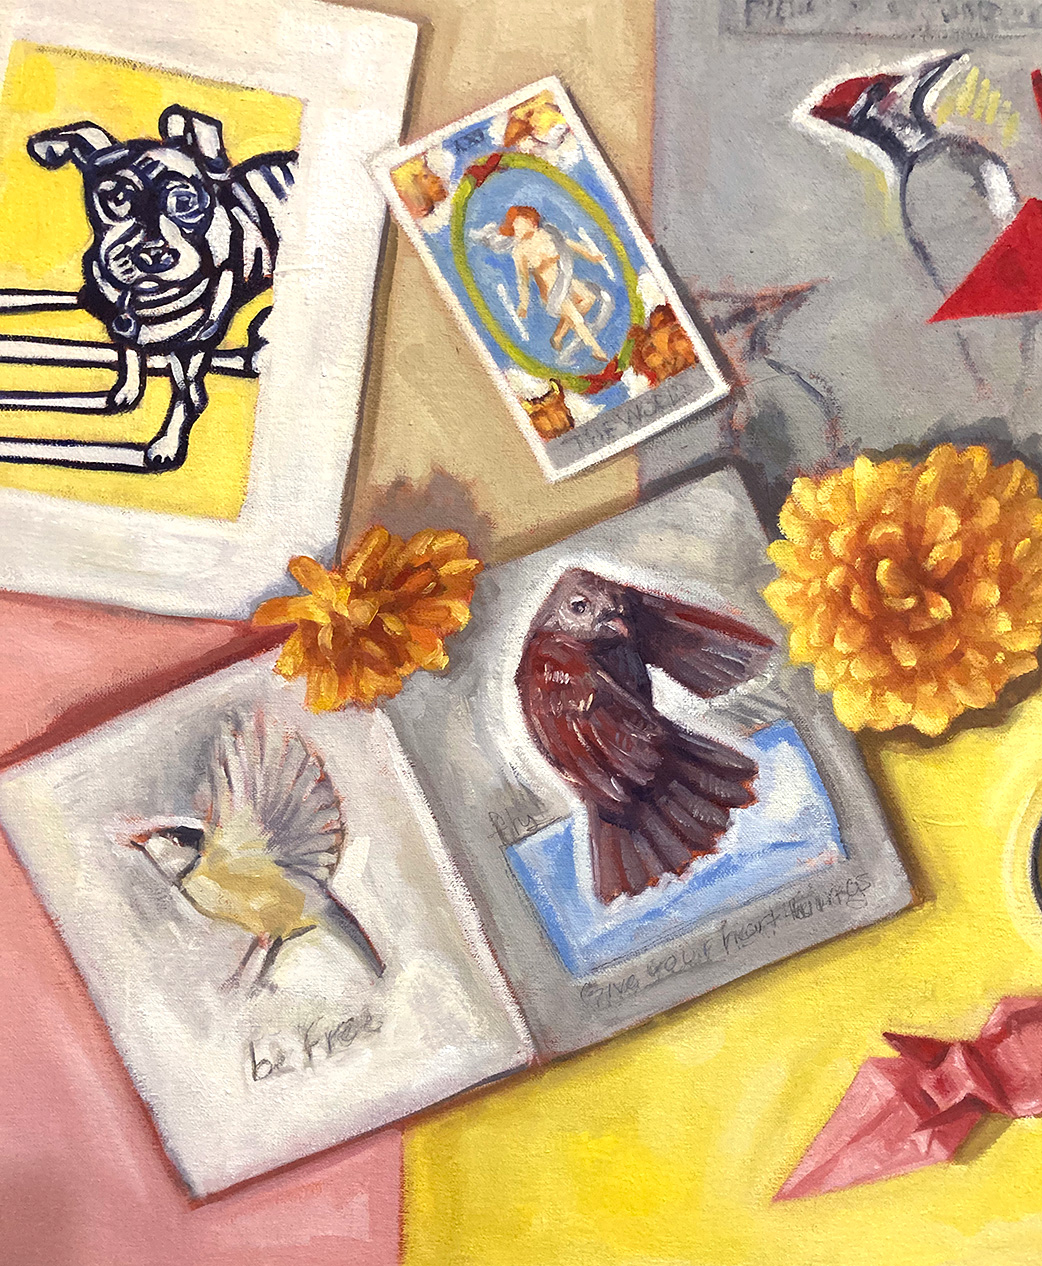 detail of Artifacts painting: print of a dog, and sketchbook open show two pages with bird sketches, Tarot cards: The World.